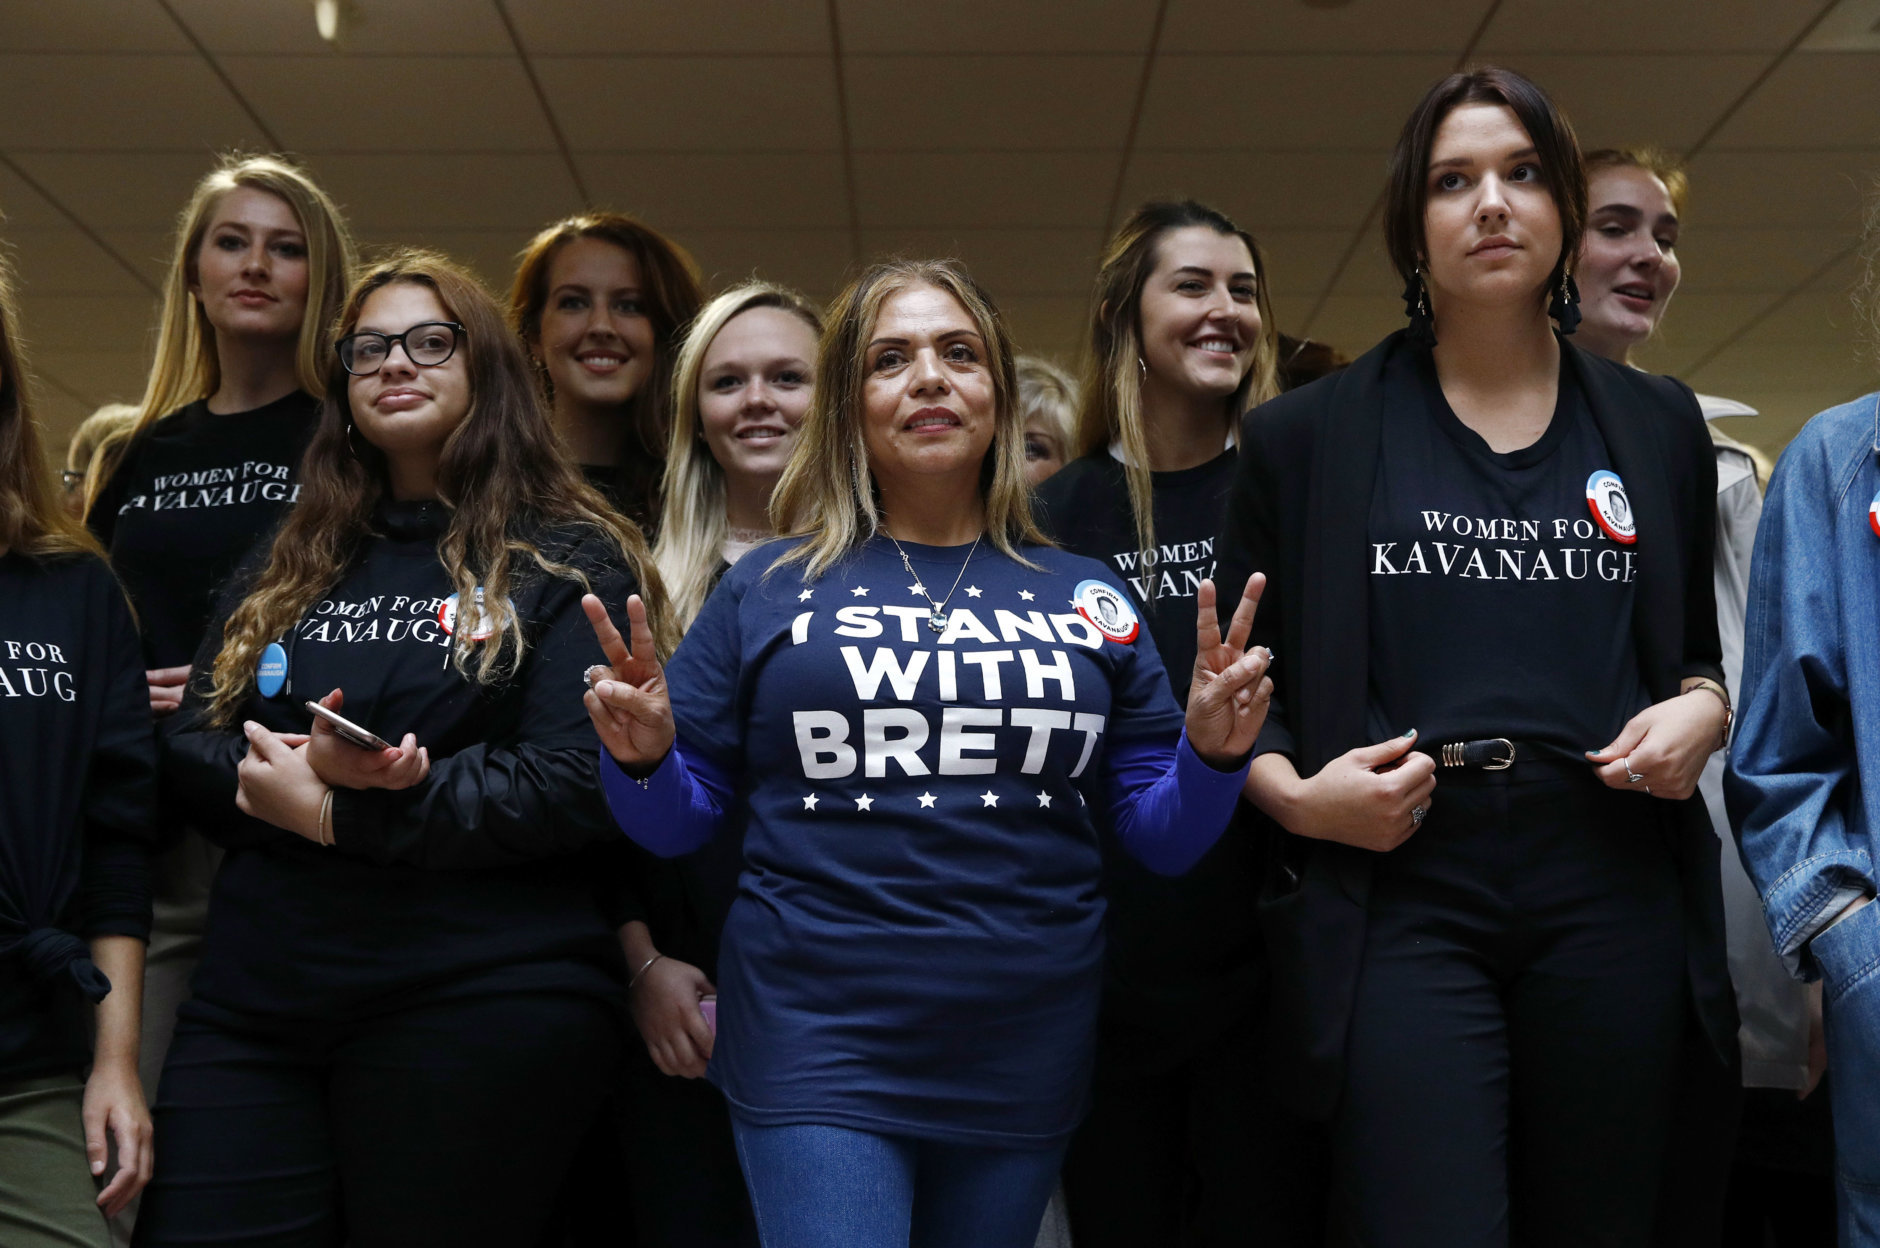 Supporters of Supreme Court nominee Brett Kavanaugh gather inside the Hart Senate Office Building on Capitol Hill in Washington, Thursday, Sept. 27, 2018. The Senate Judiciary Committee is hearing from Christine Blasey Ford, the woman who says Kavanaugh sexually assaulted her. (AP Photo/Patrick Semansky)